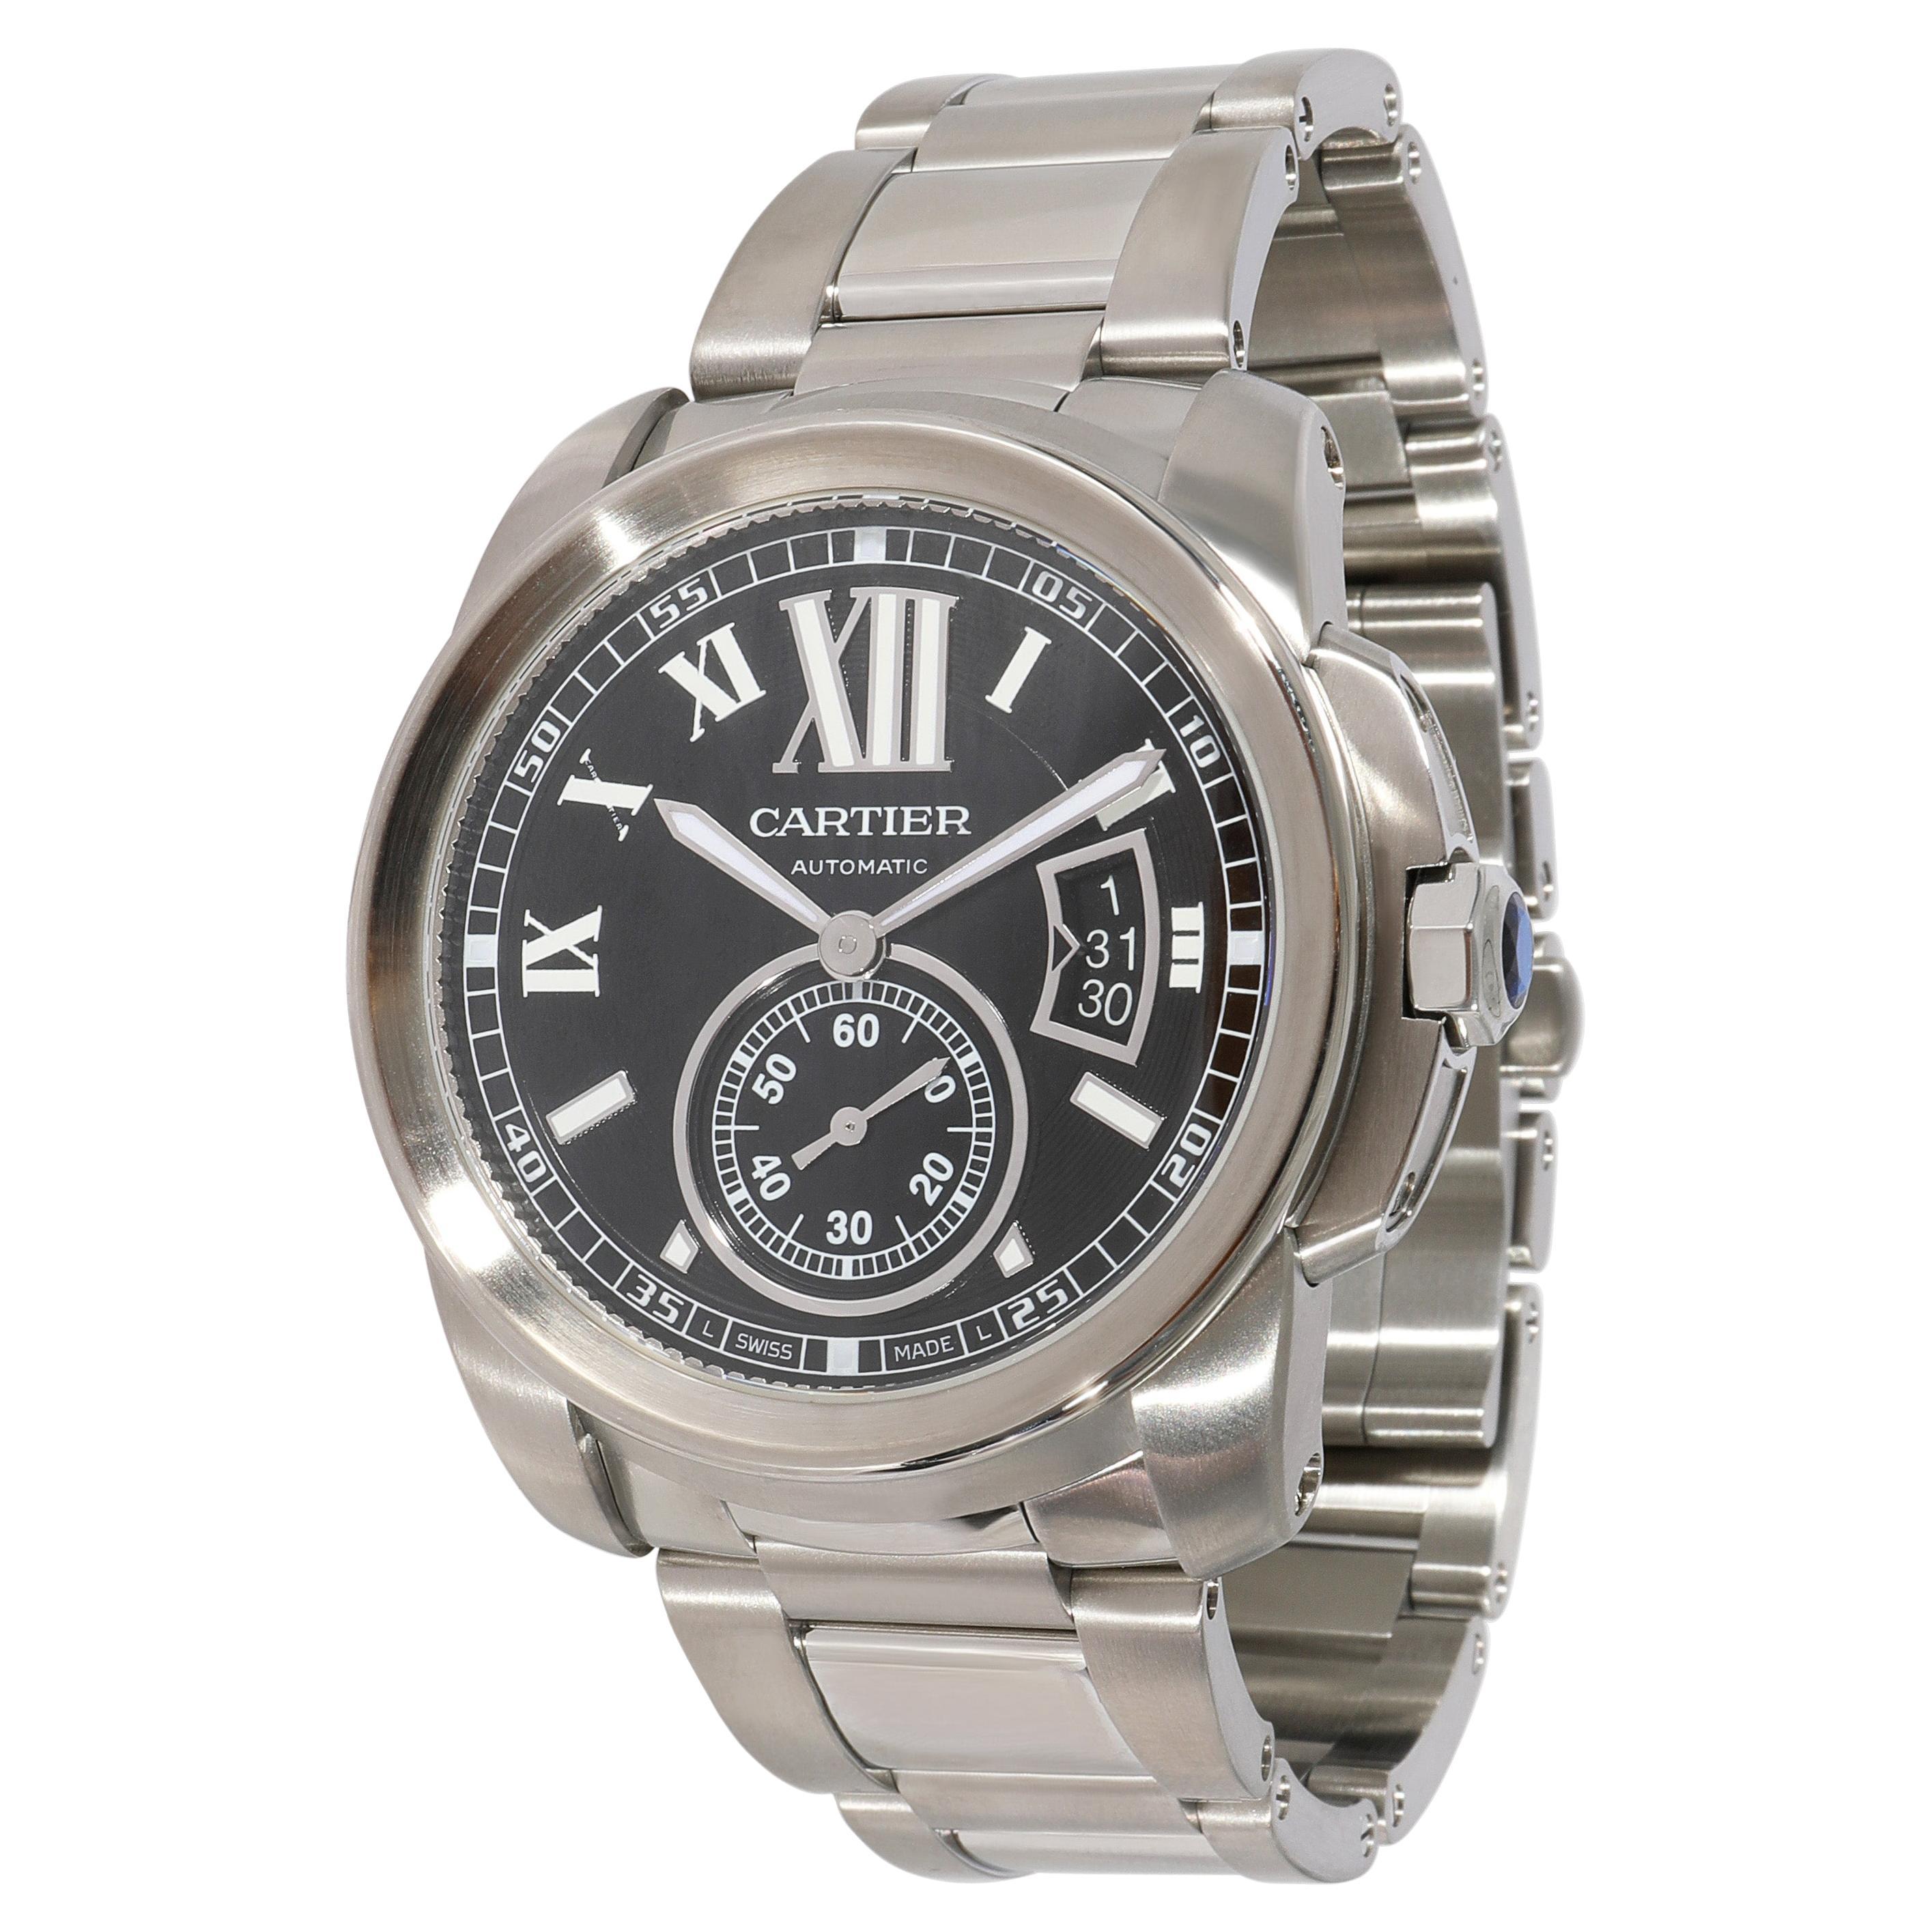 Cartier Calibre W7100016 Men's Watch in Stainless Steel